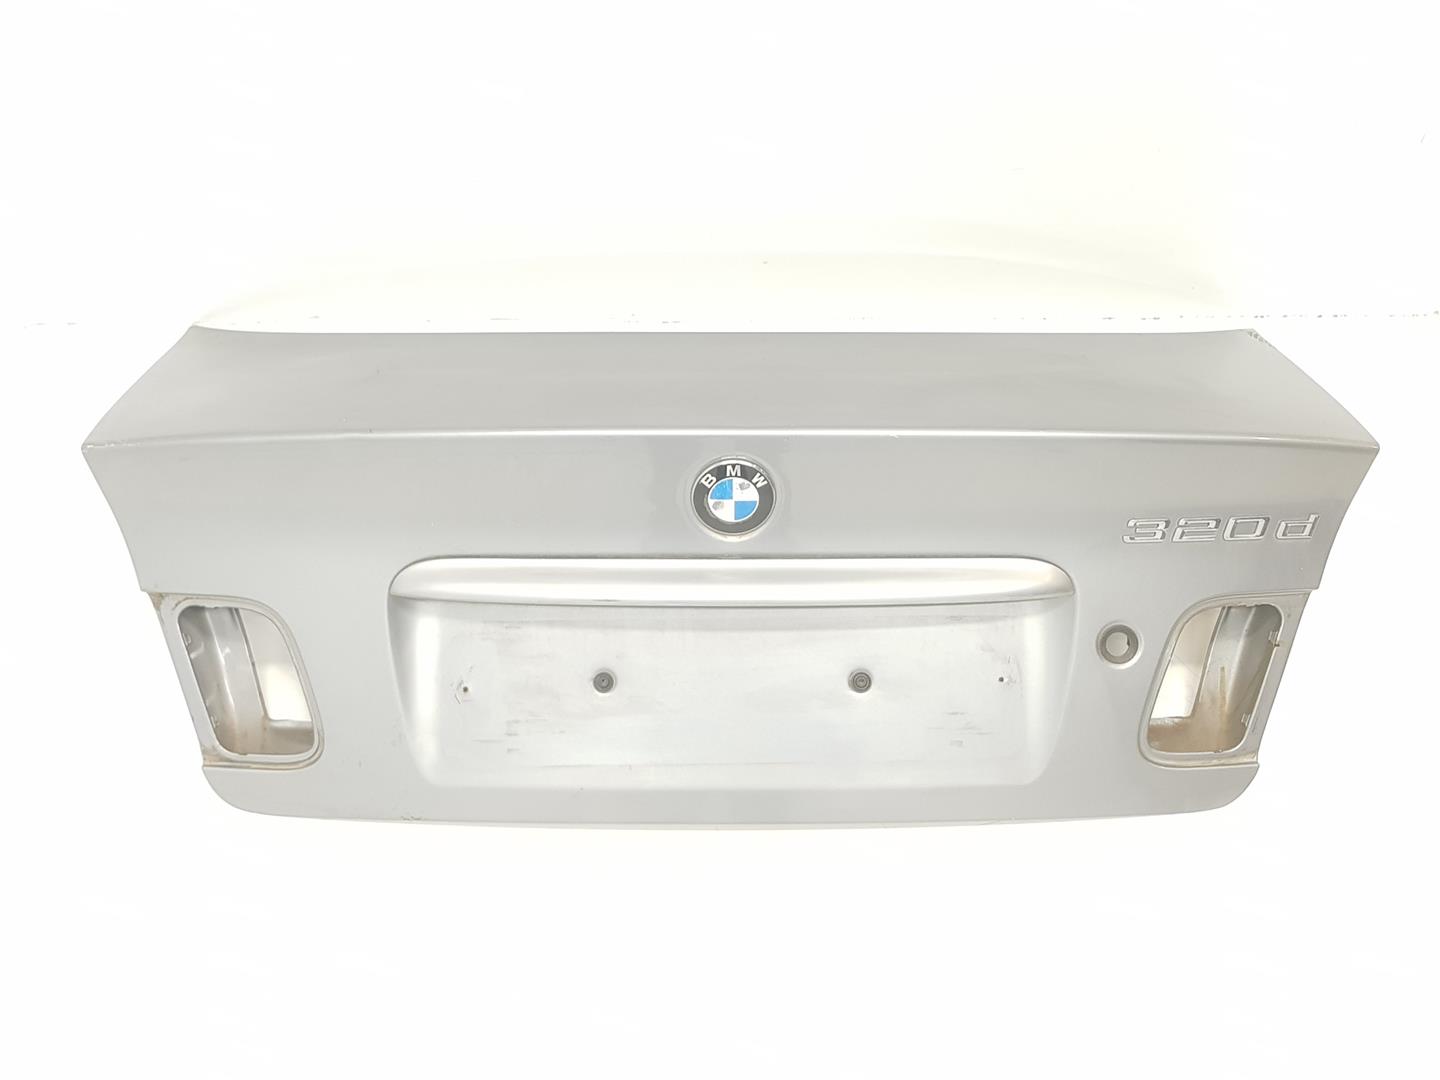 BMW 3 (E46) Bootlid Rear Boot 41627003314, 41627003314, COLORGRISA08 19798358